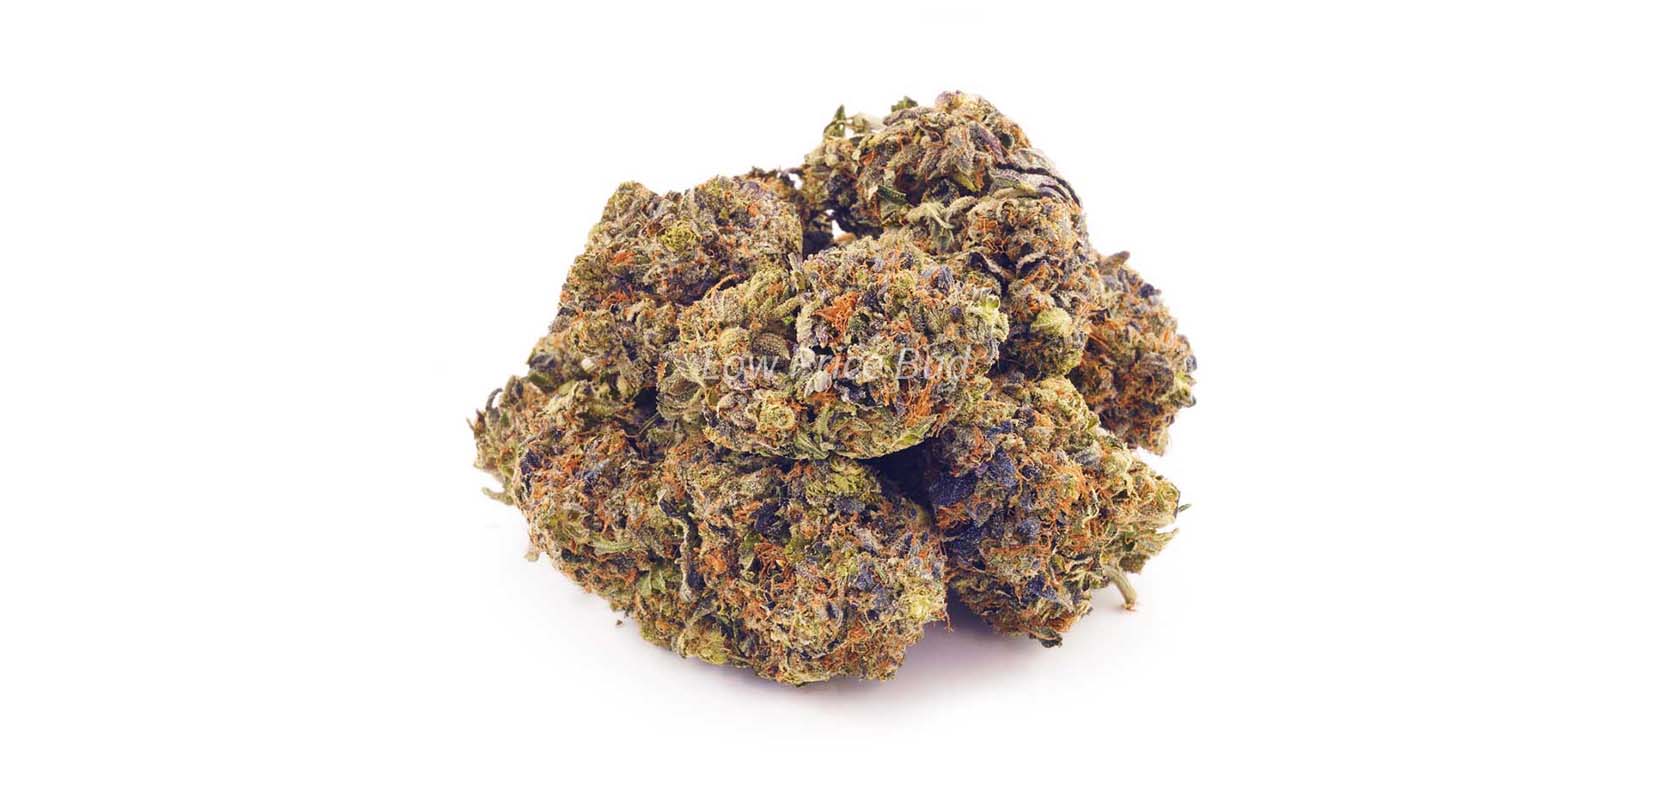 Sour Skunk weed online Canada. Budget bud from Low Price Bud online dispensary and mail order marijuana weed store.